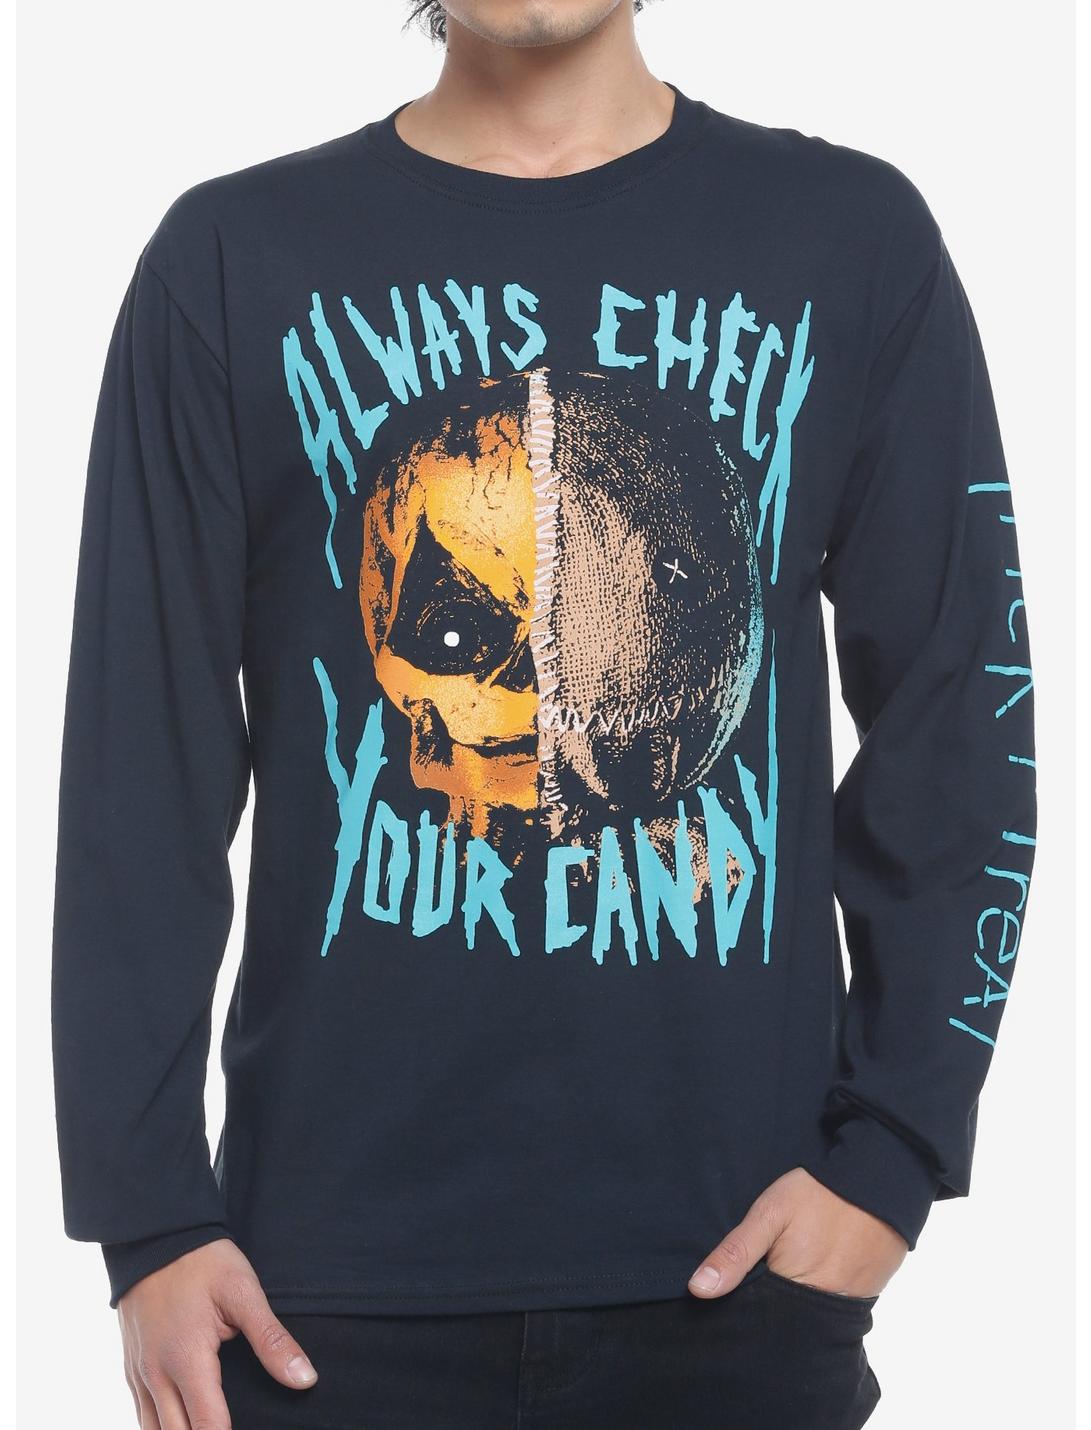 Trick 'R Treat Always Check Your Candy Long-Sleeve T-Shirt, BLACK, hi-res